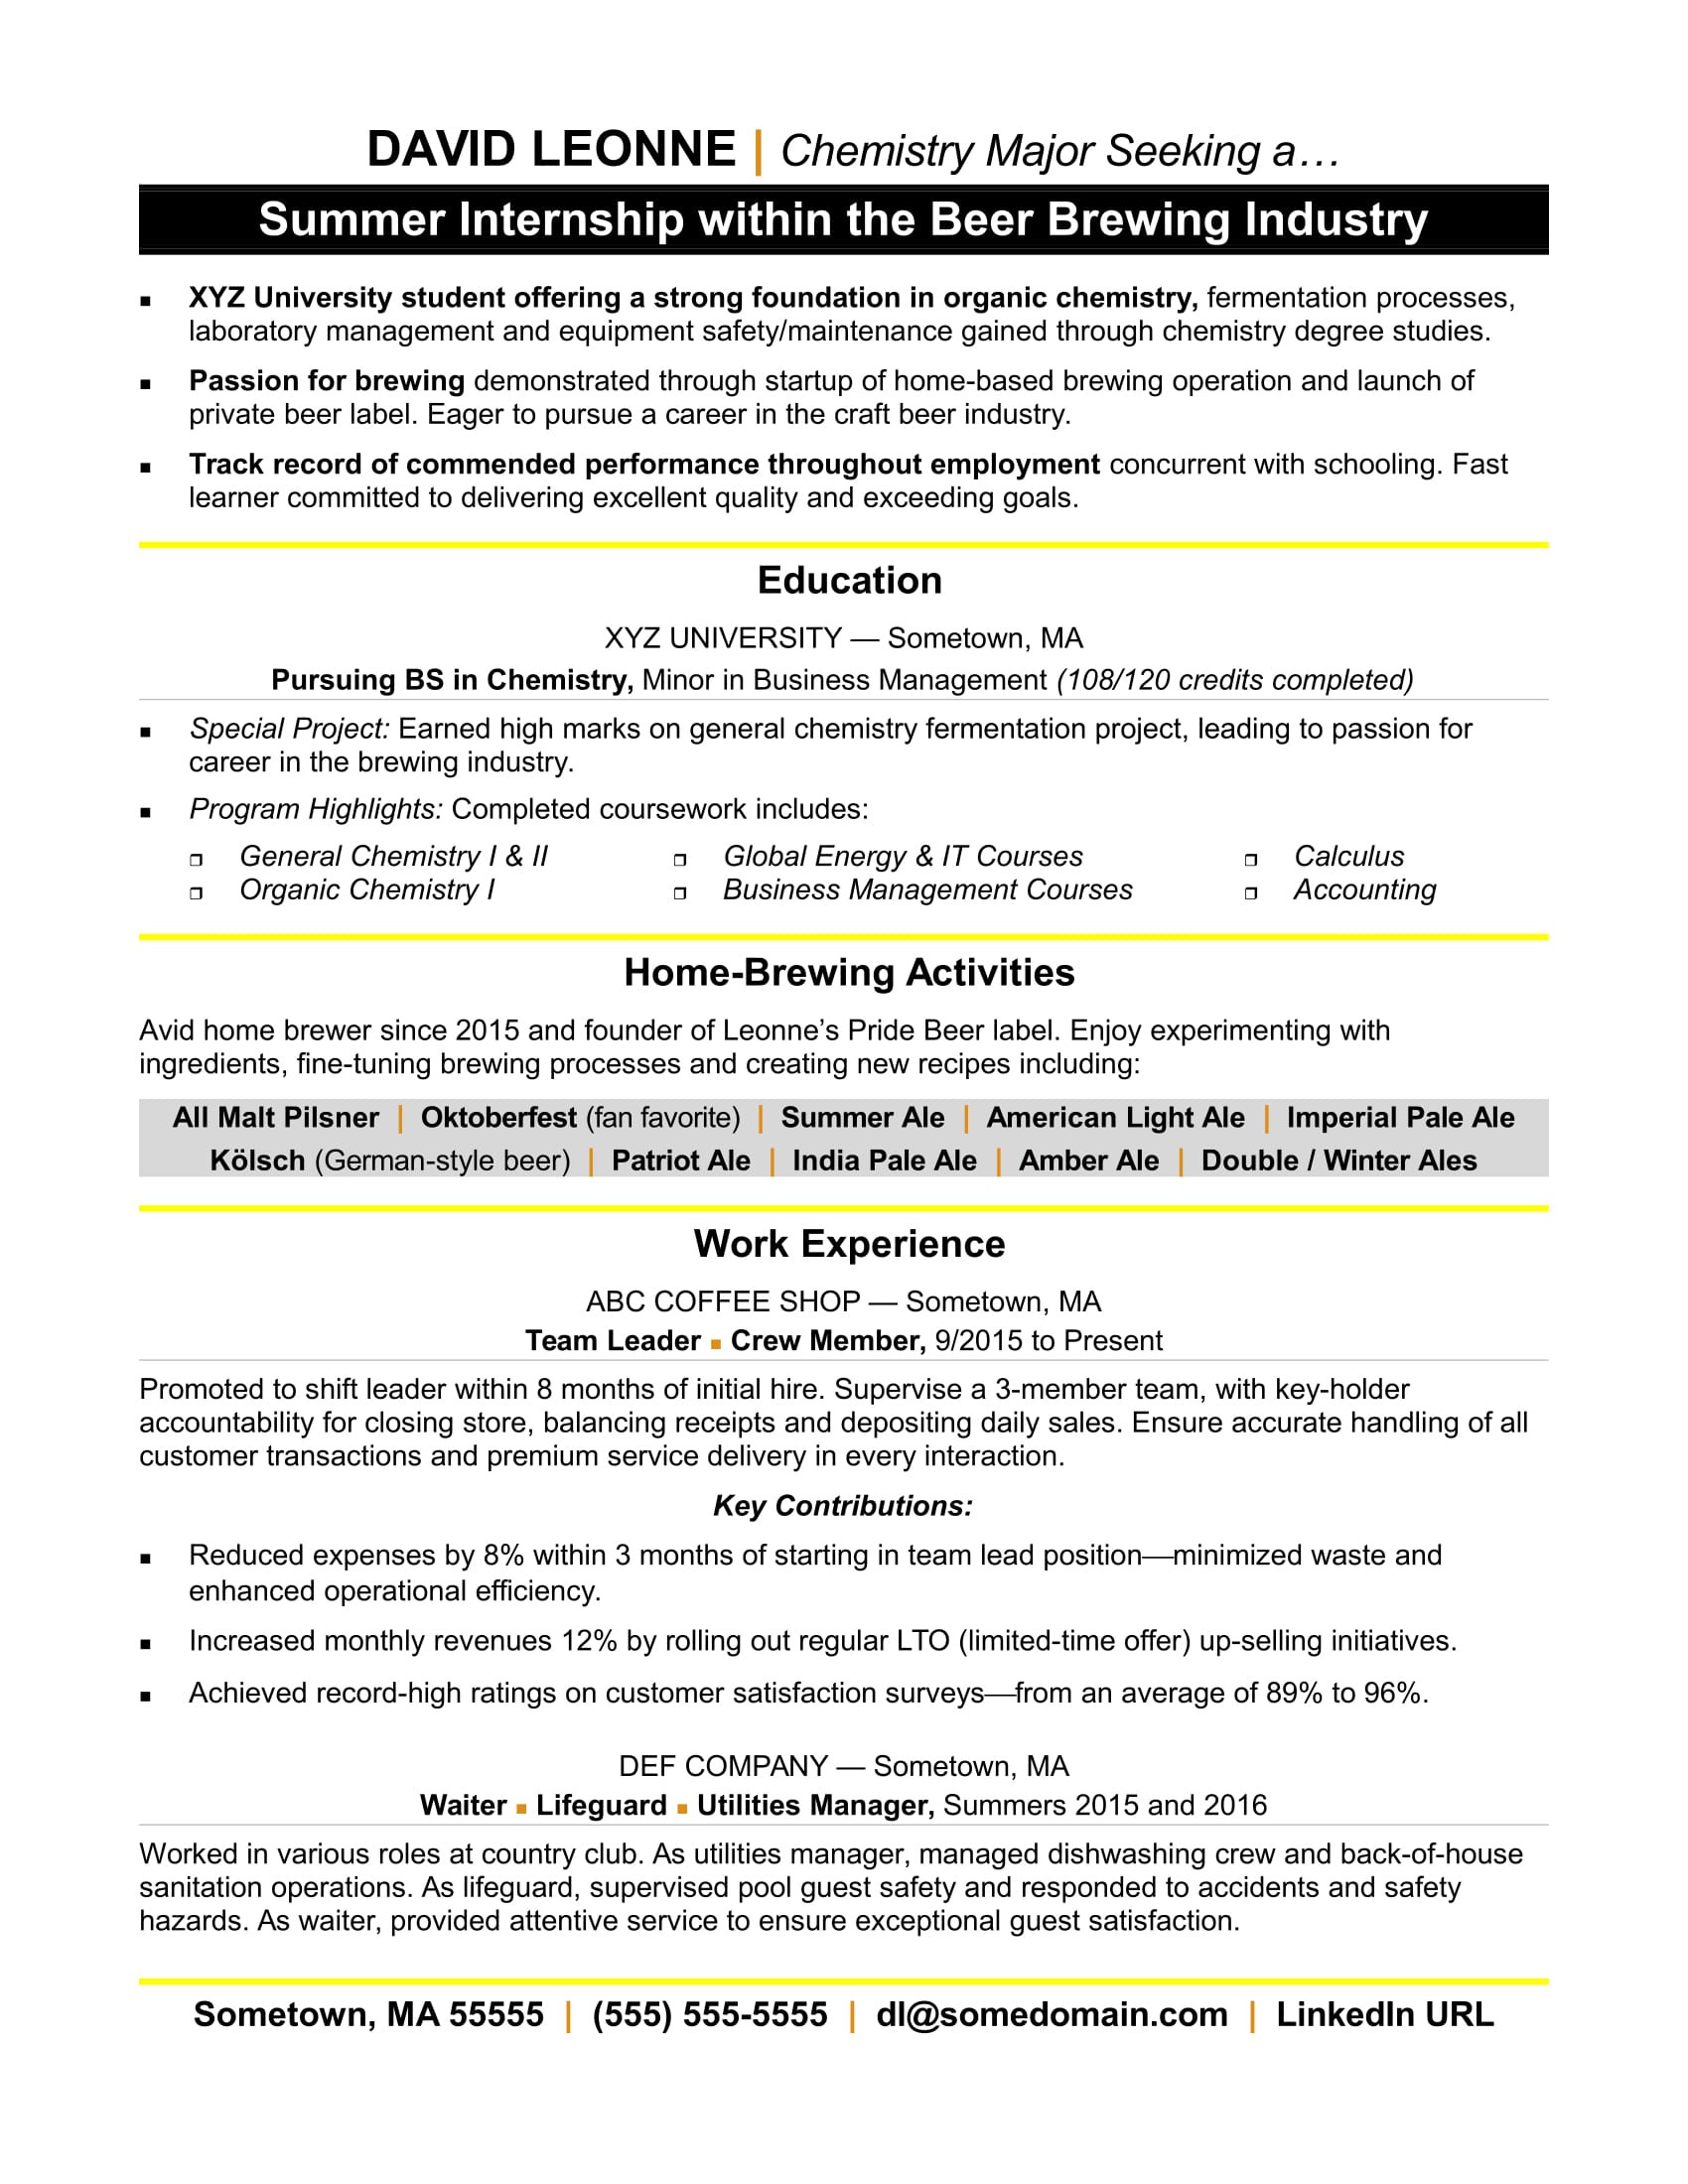 Sample Resume with Different Work Experience Resume for Internship Monster.com